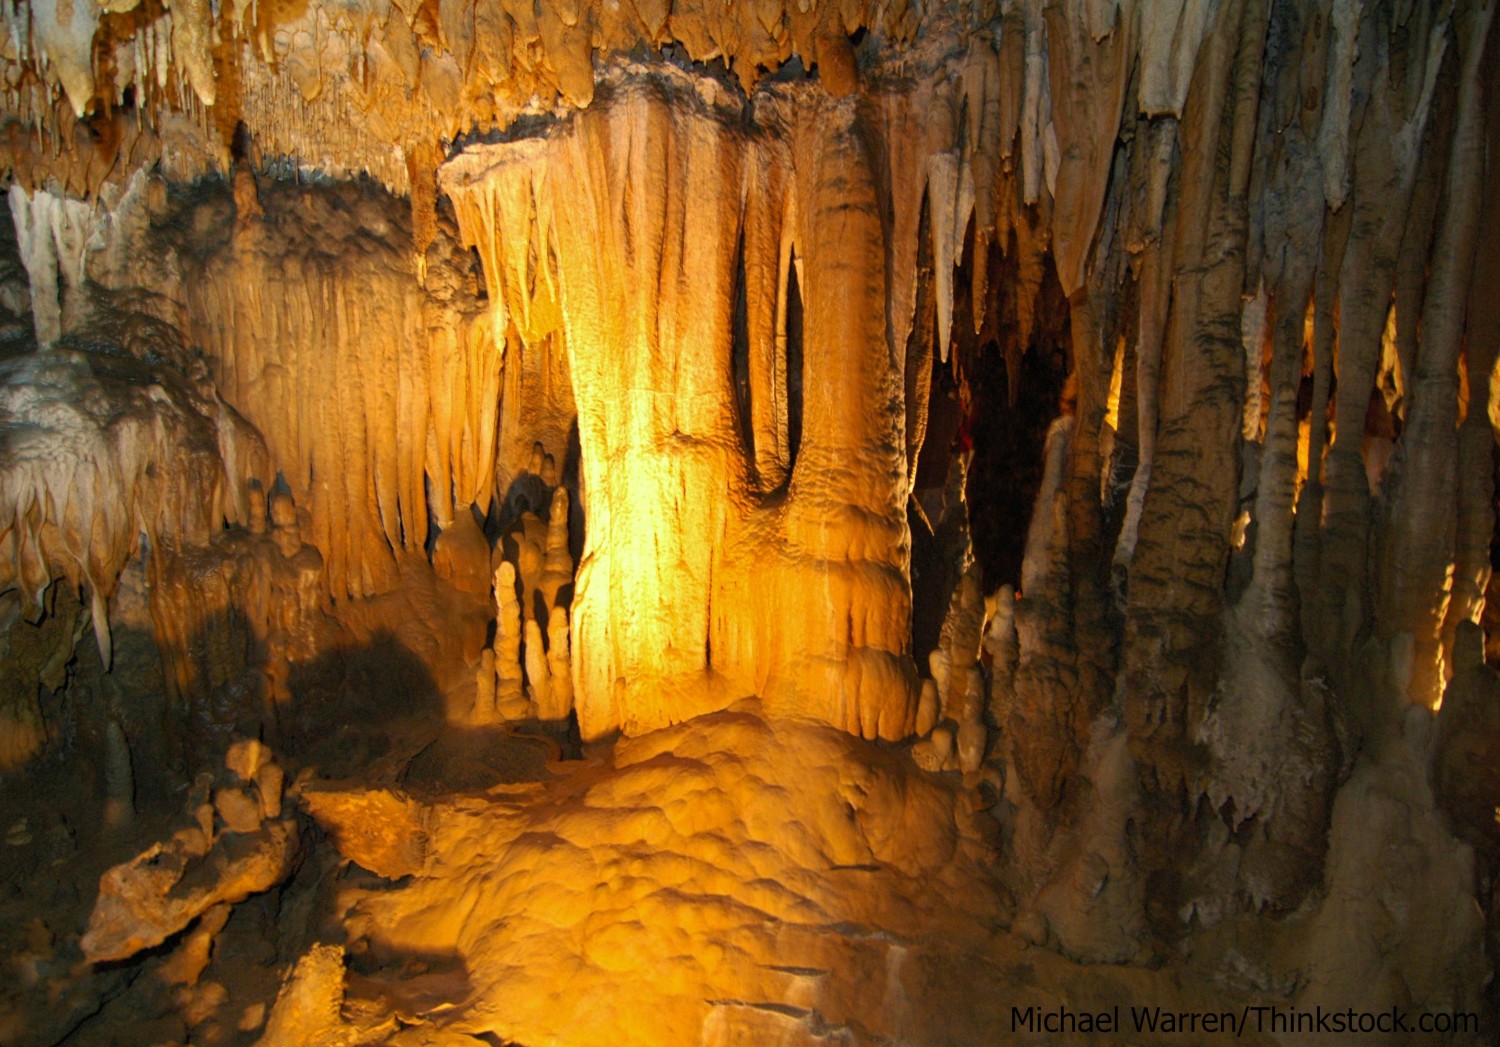 How to Have an Amazing Time While Visiting Talking Rocks Cavern